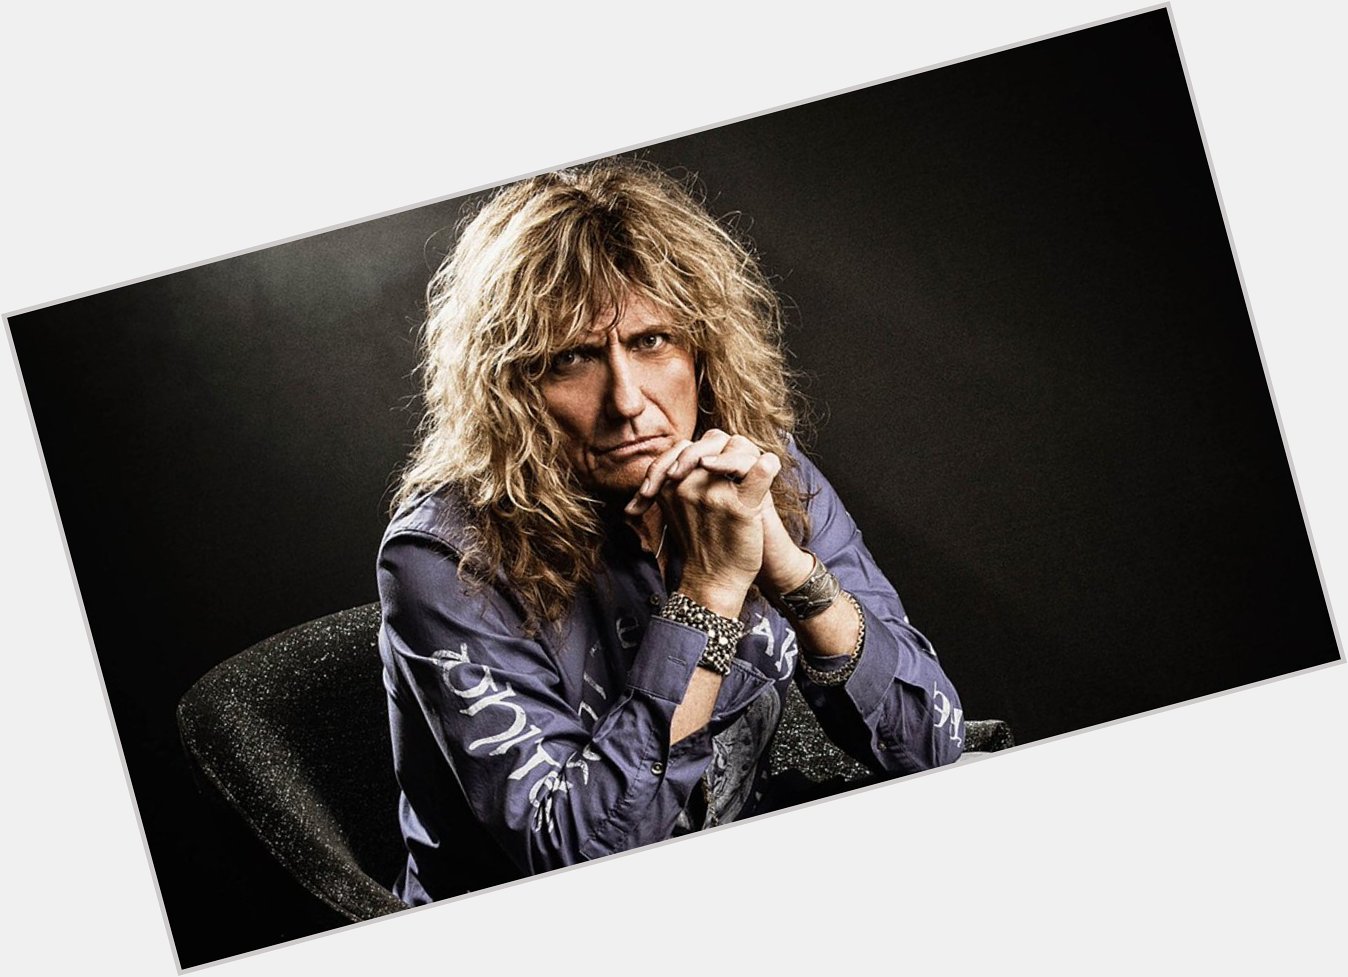  Here I Go Again  Happy Birthday Today 9/22 to Whitesnake vocalist/songwriter David Coverdale. Rock ON! 